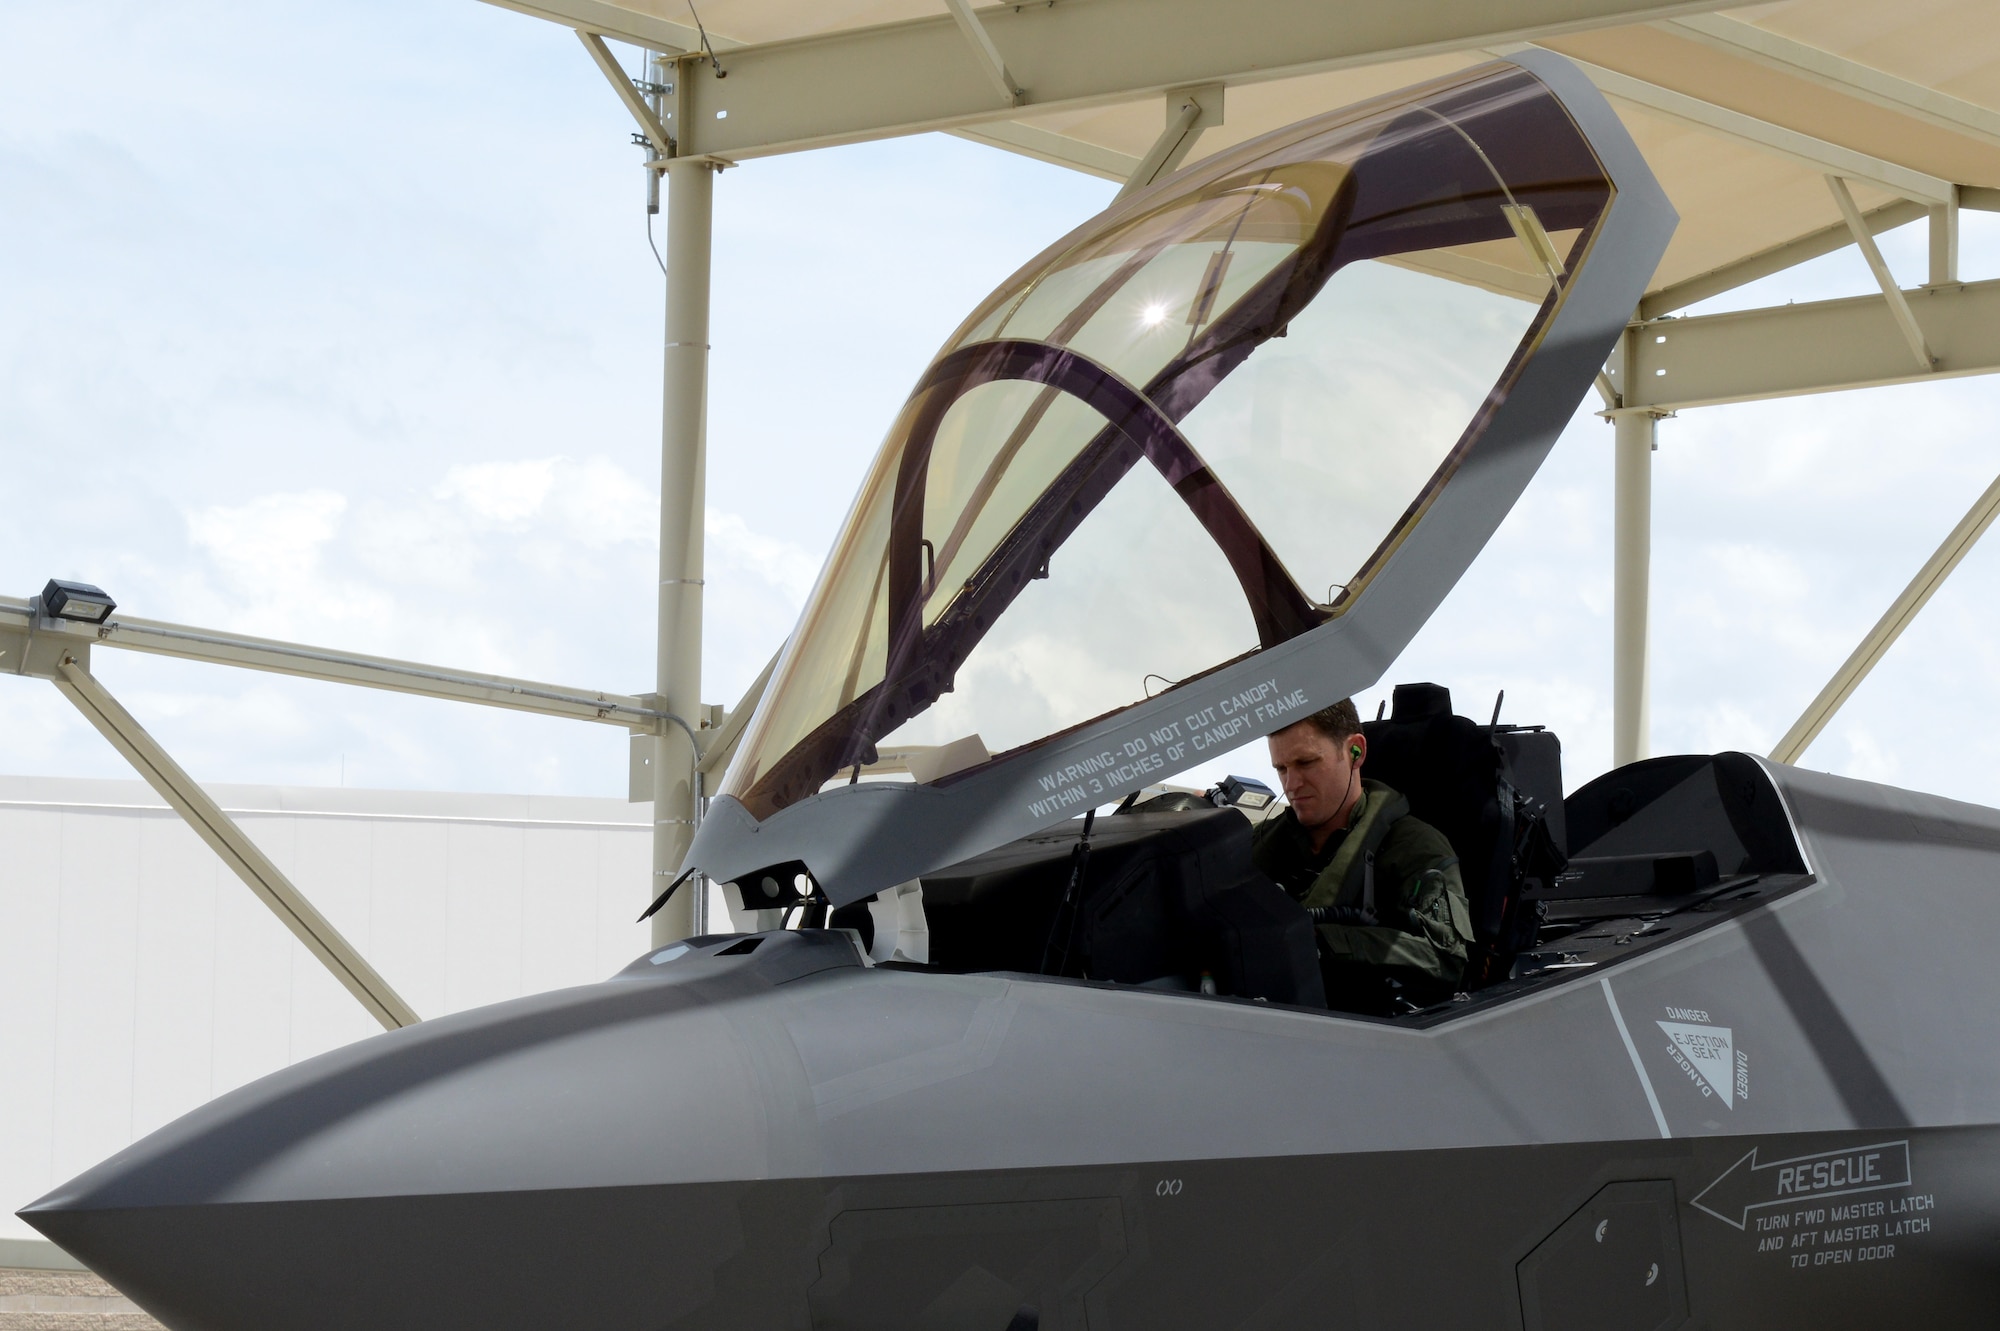 Royal Australian Air Force Maj. Andrew Jackson, 61st Fighter Squadron RAAF squadron leader, performs pre-flight checks in a RAAF F-35 A Lightning II at Luke Air Force Base, Arizona, May 14, 2015. Pre-flight checks help ensure the aircraft is fit and flight ready. Jackson was the first Australian pilot to fly the RAAF F-35 at Luke. (U.S. Air Force photo by Senior Airman James Hensley)